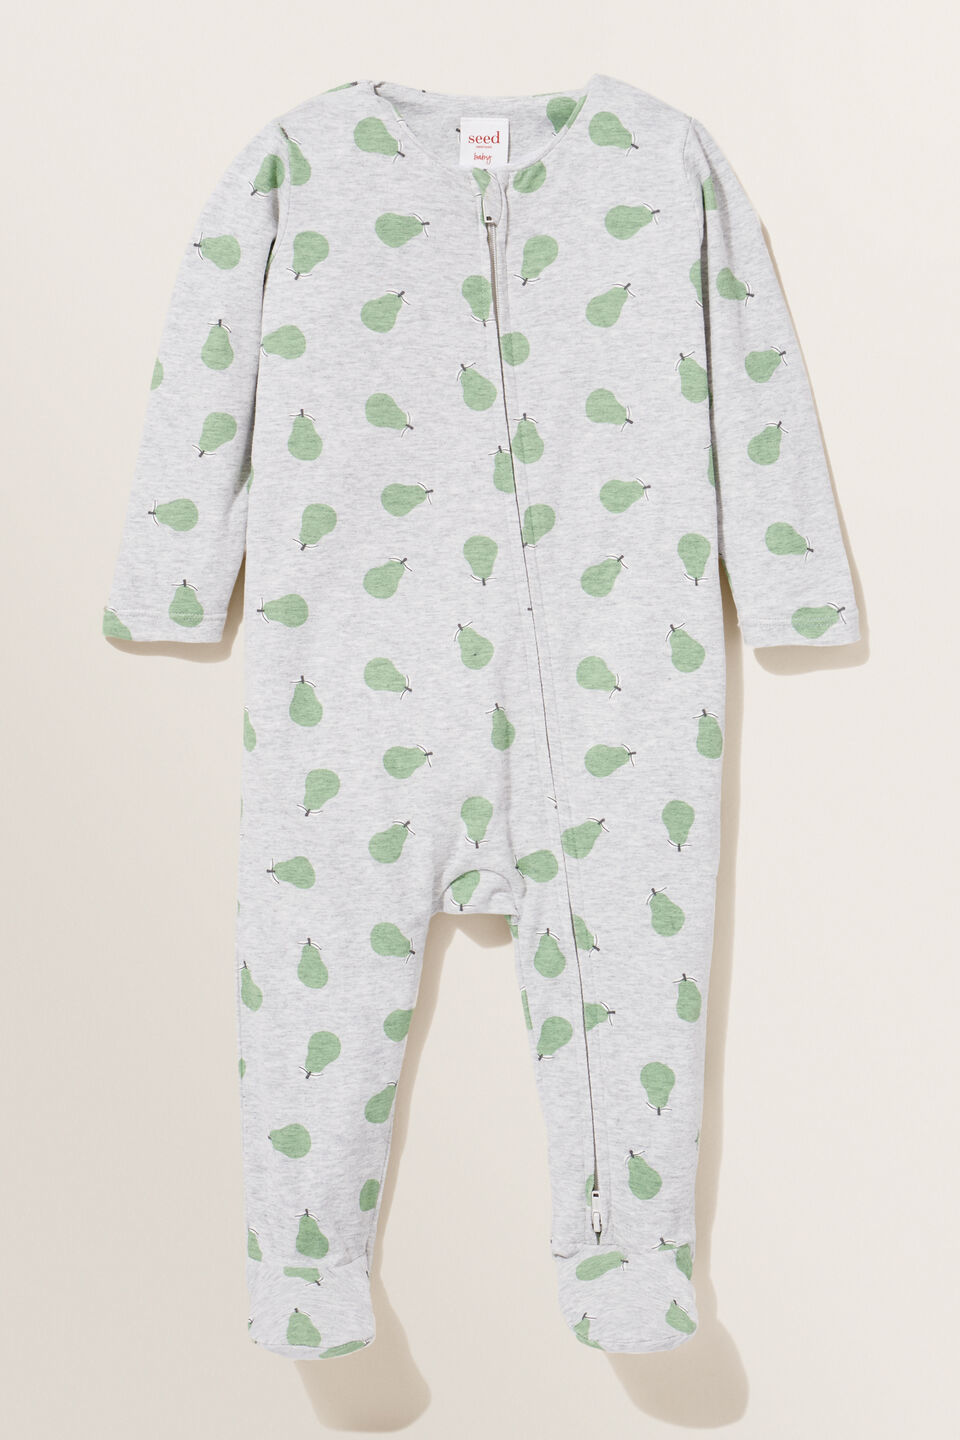 Pear Zipsuit  Pale Grey Marle